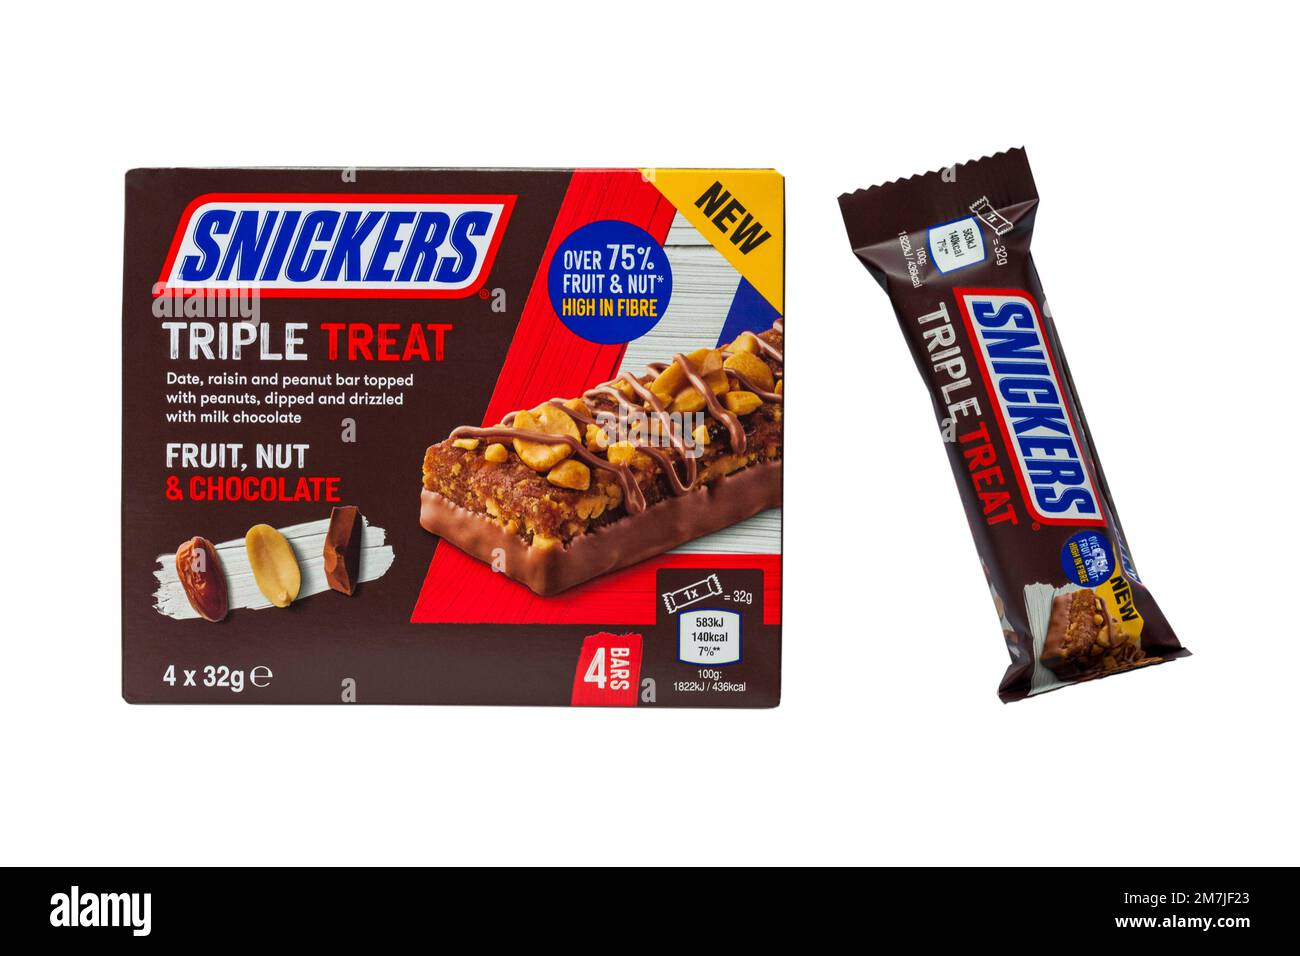 Snickers Triple Treat Fruit, Nut & Chocolate date raisin and peanut bar topped with peanuts, dipped and drizzled with milk chocolate isolated on white Stock Photo